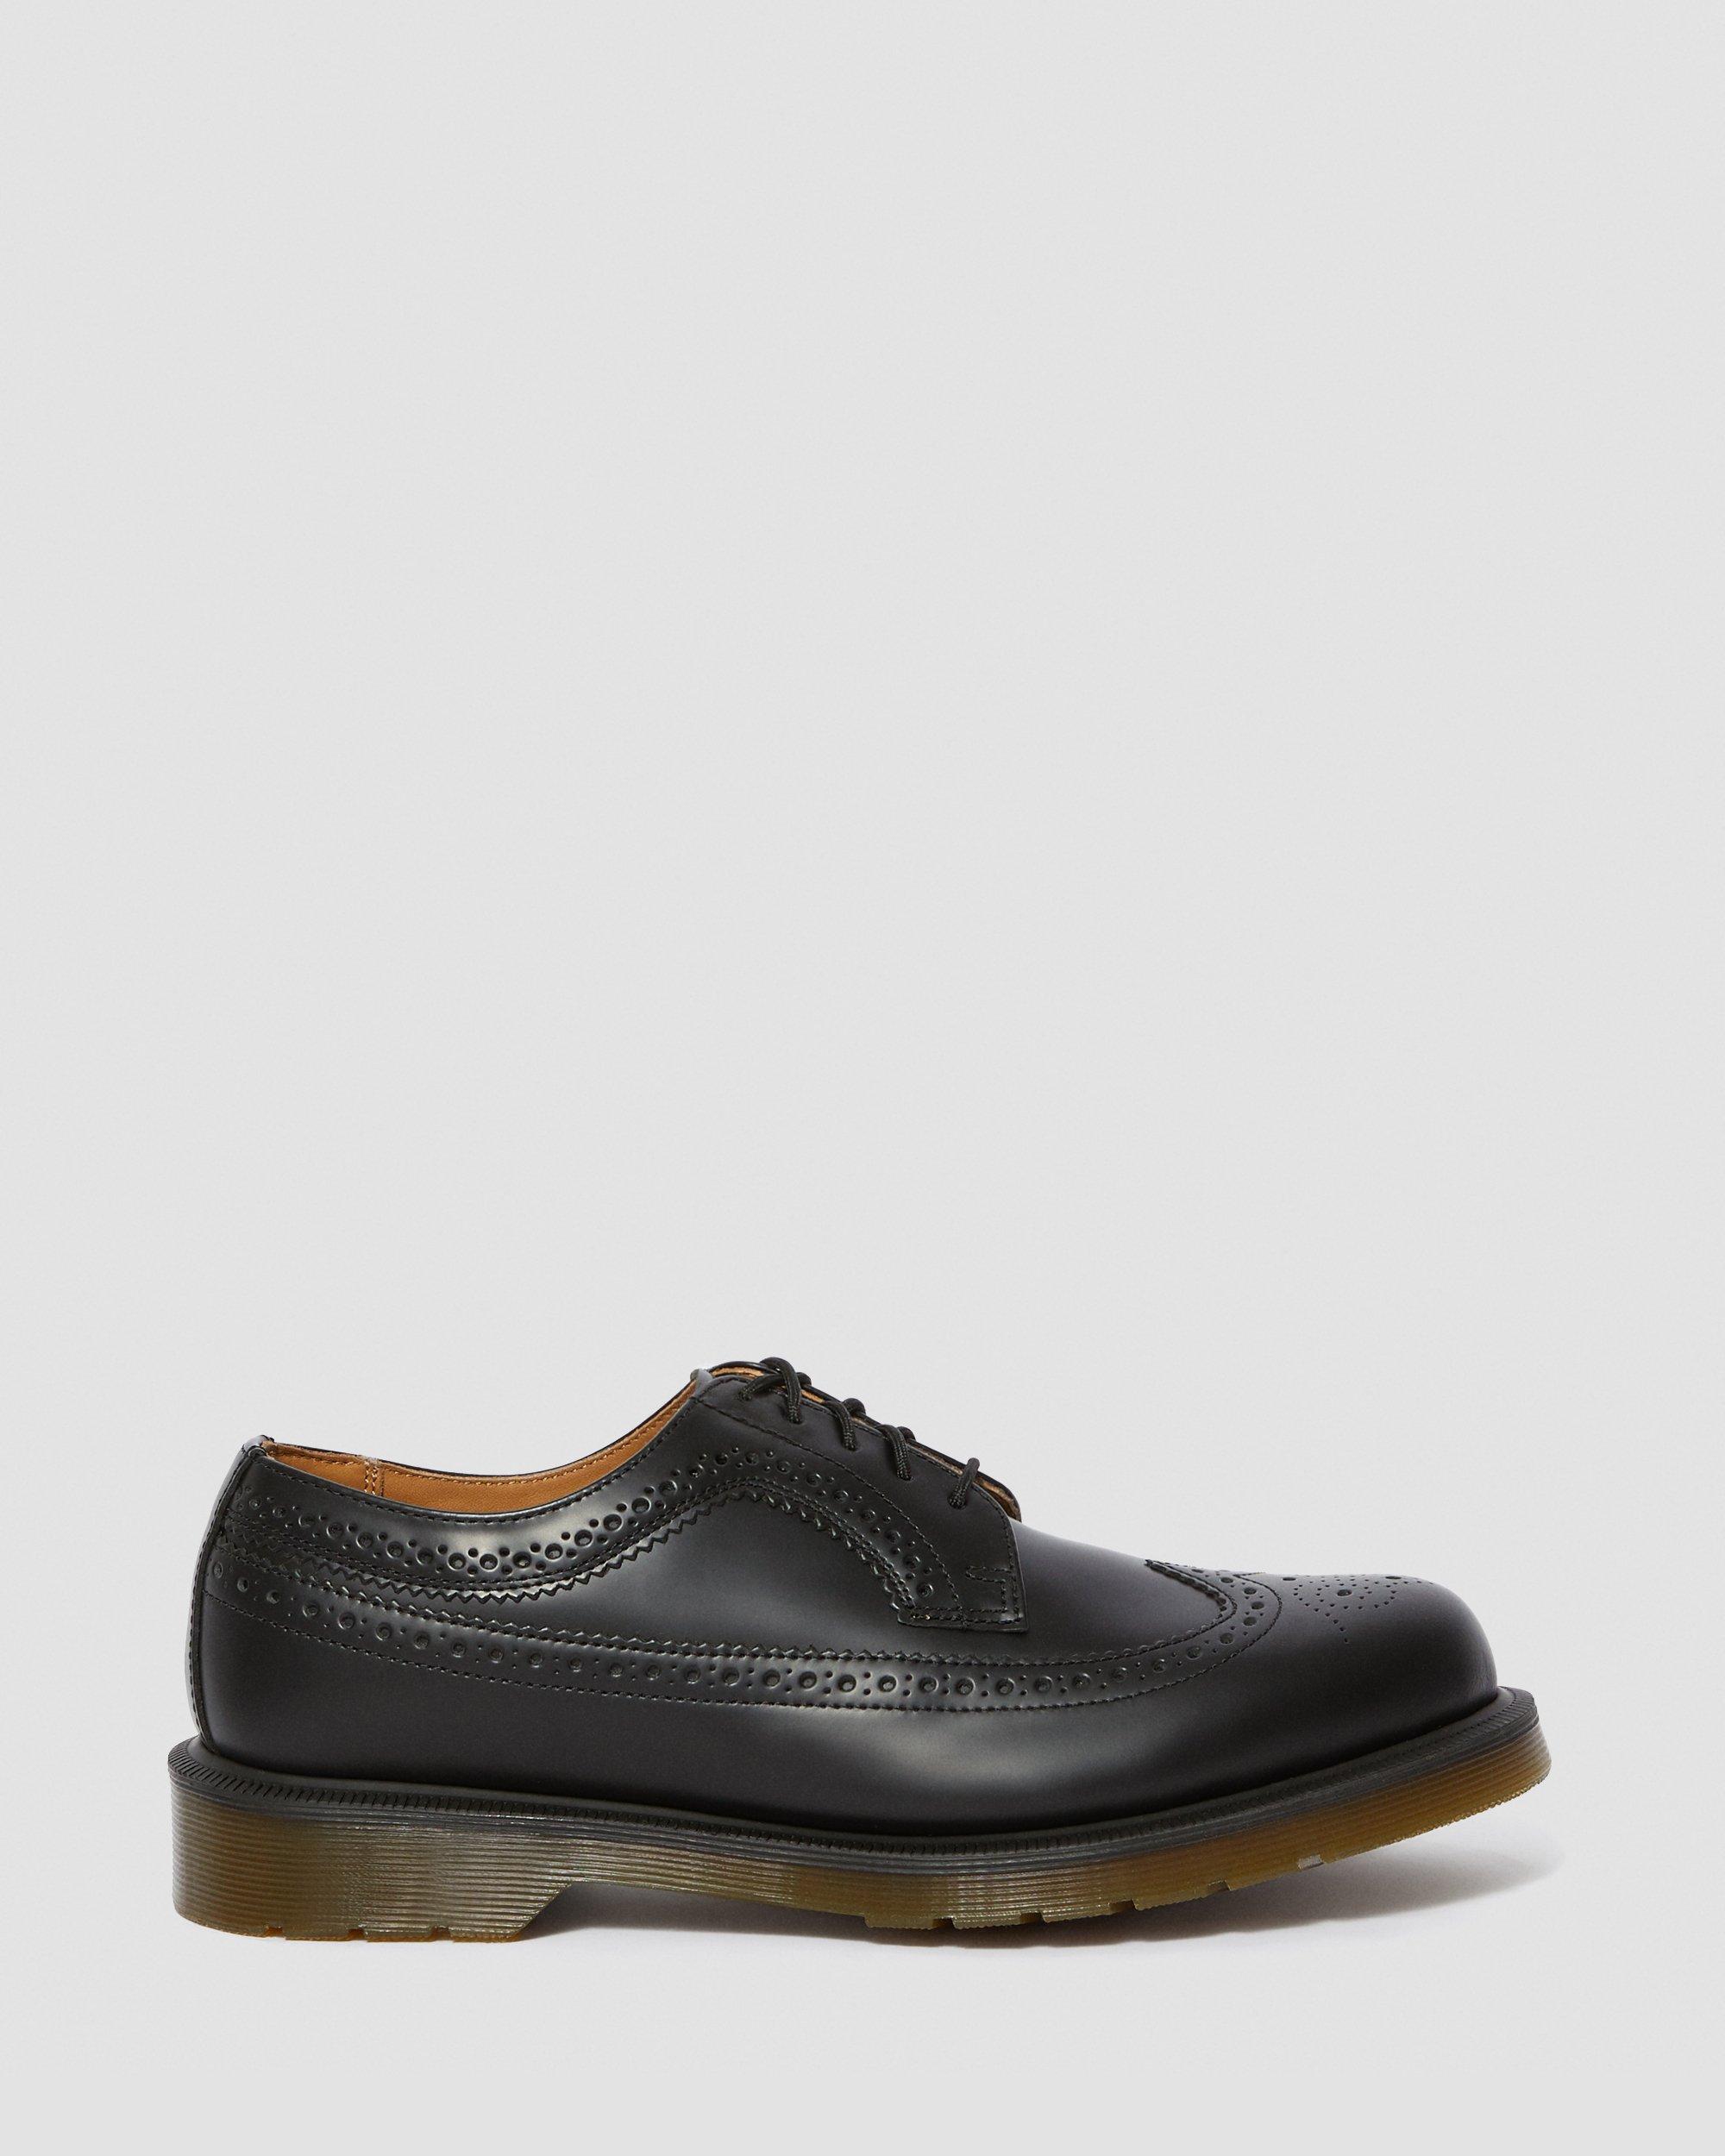 DR MARTENS 3989 Smooth Leather Brogue Shoes